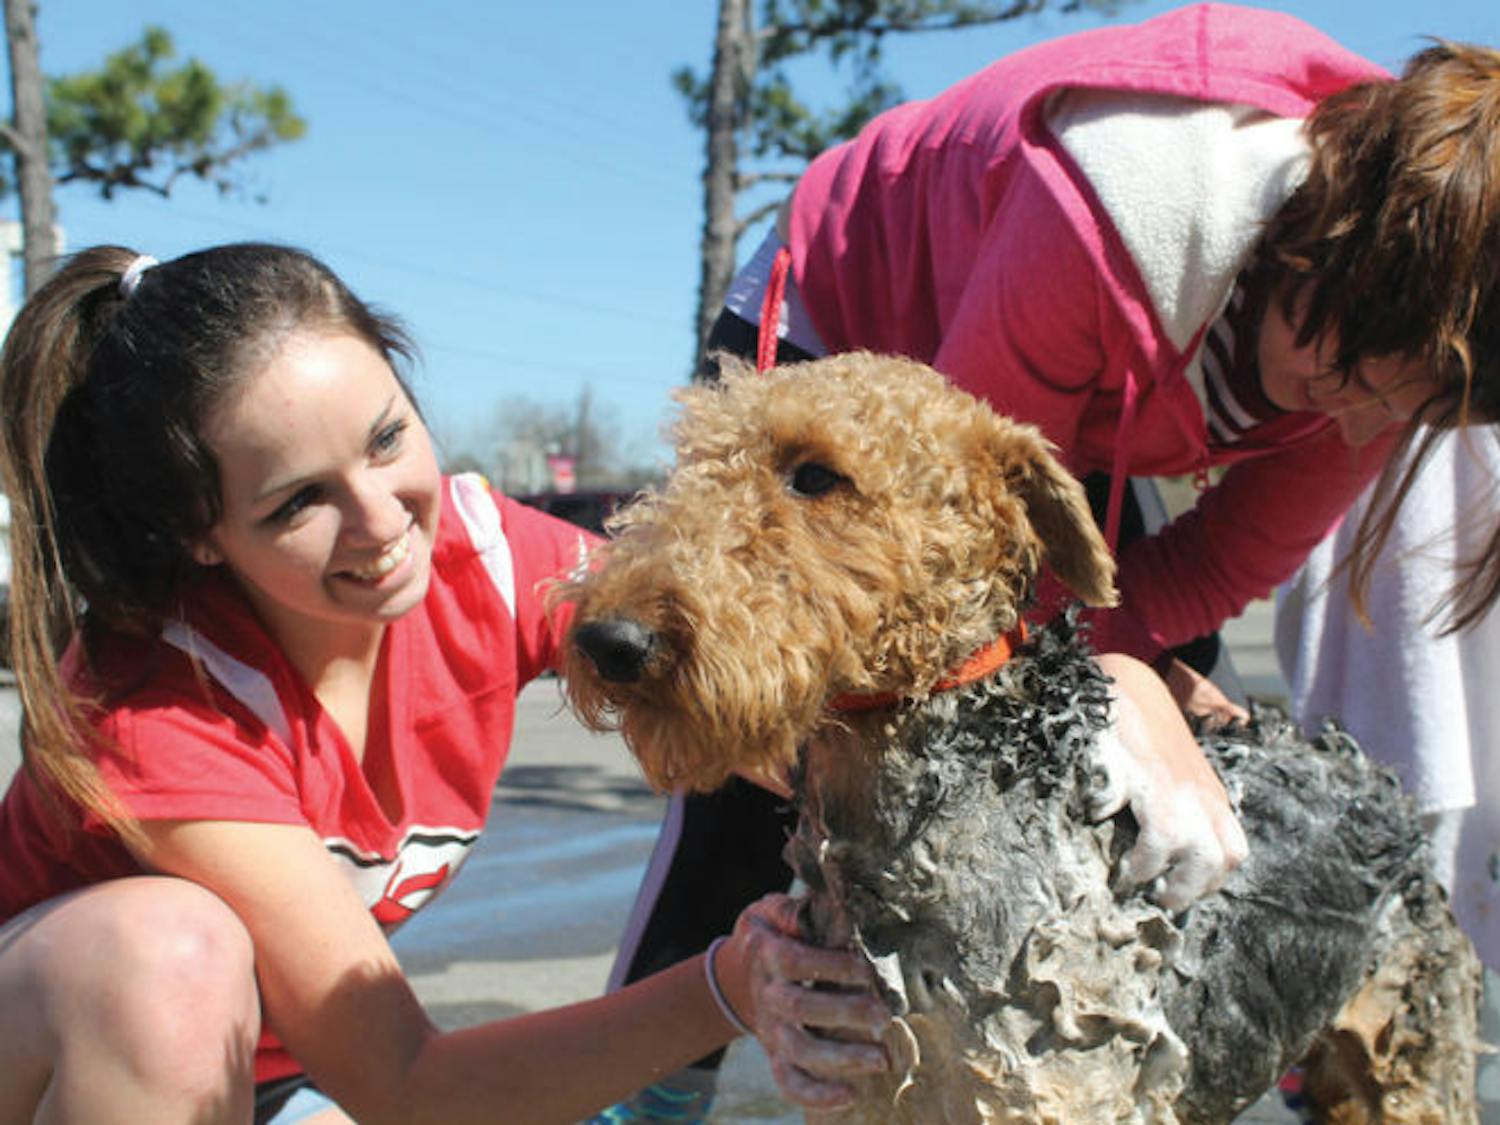 First-year veterinary students Lauren Brown, 23, and Patricia Diskant, 22, wash Kammie, a 4-year-old Airedale Terrier at Project HEAL’s dog wash Sunday. Dogs received a wash, nail trim and ear cleaning for a $5 donation.&nbsp;